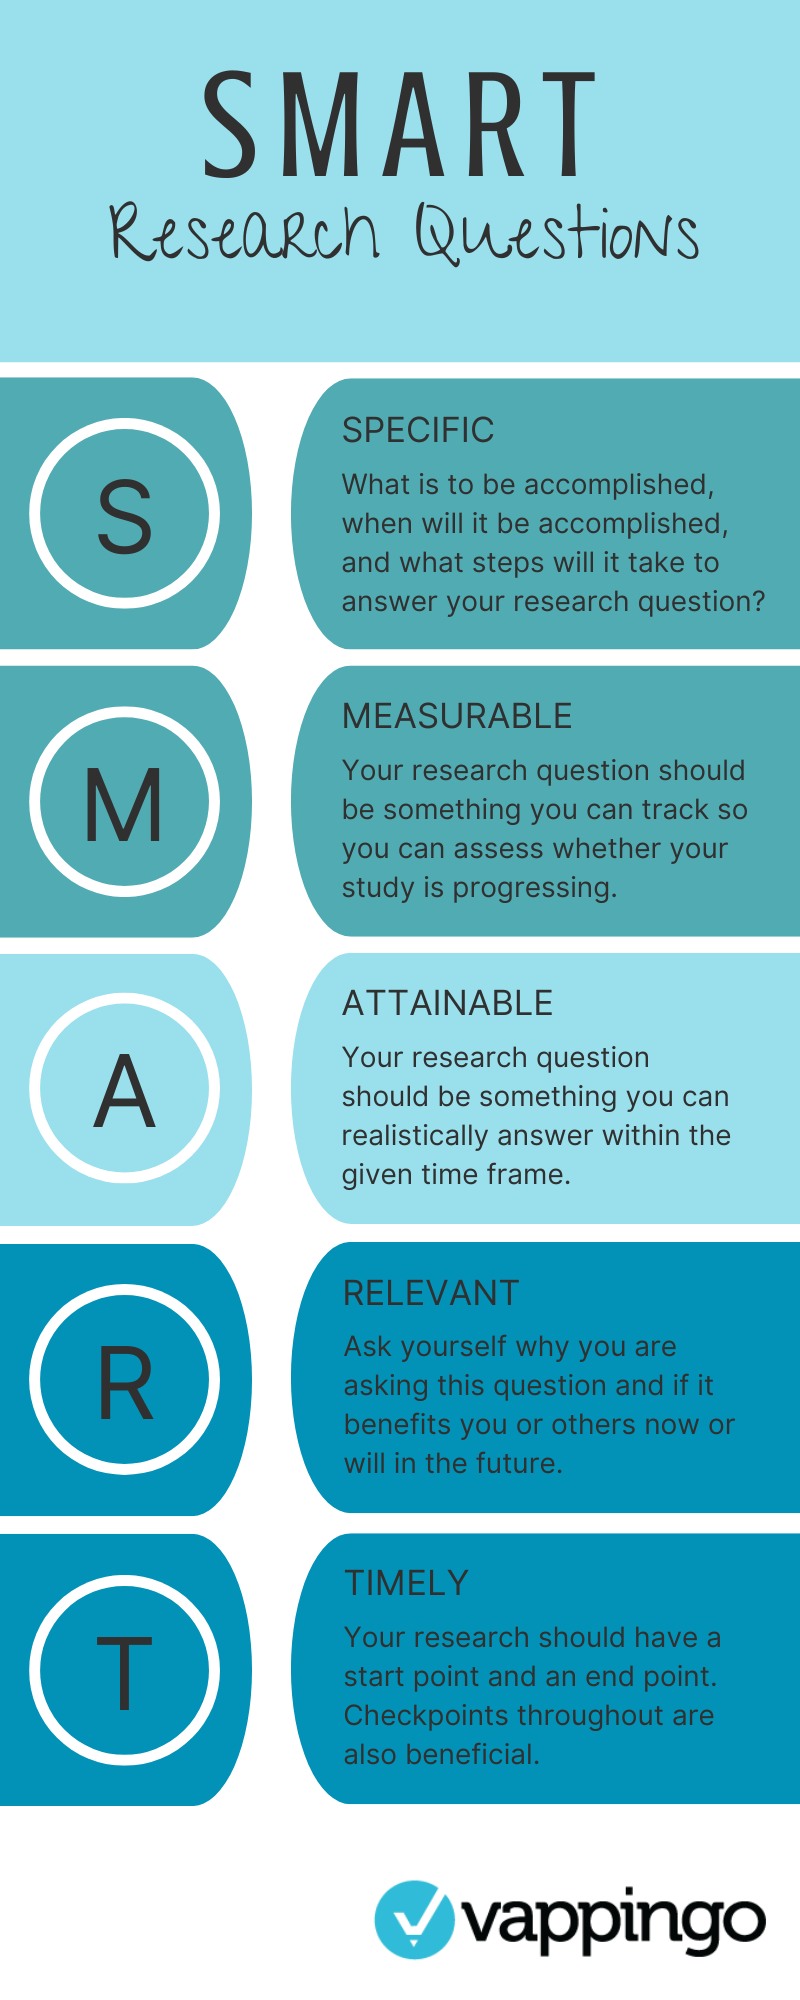 Infographic presenting an overview of SMART research question generation